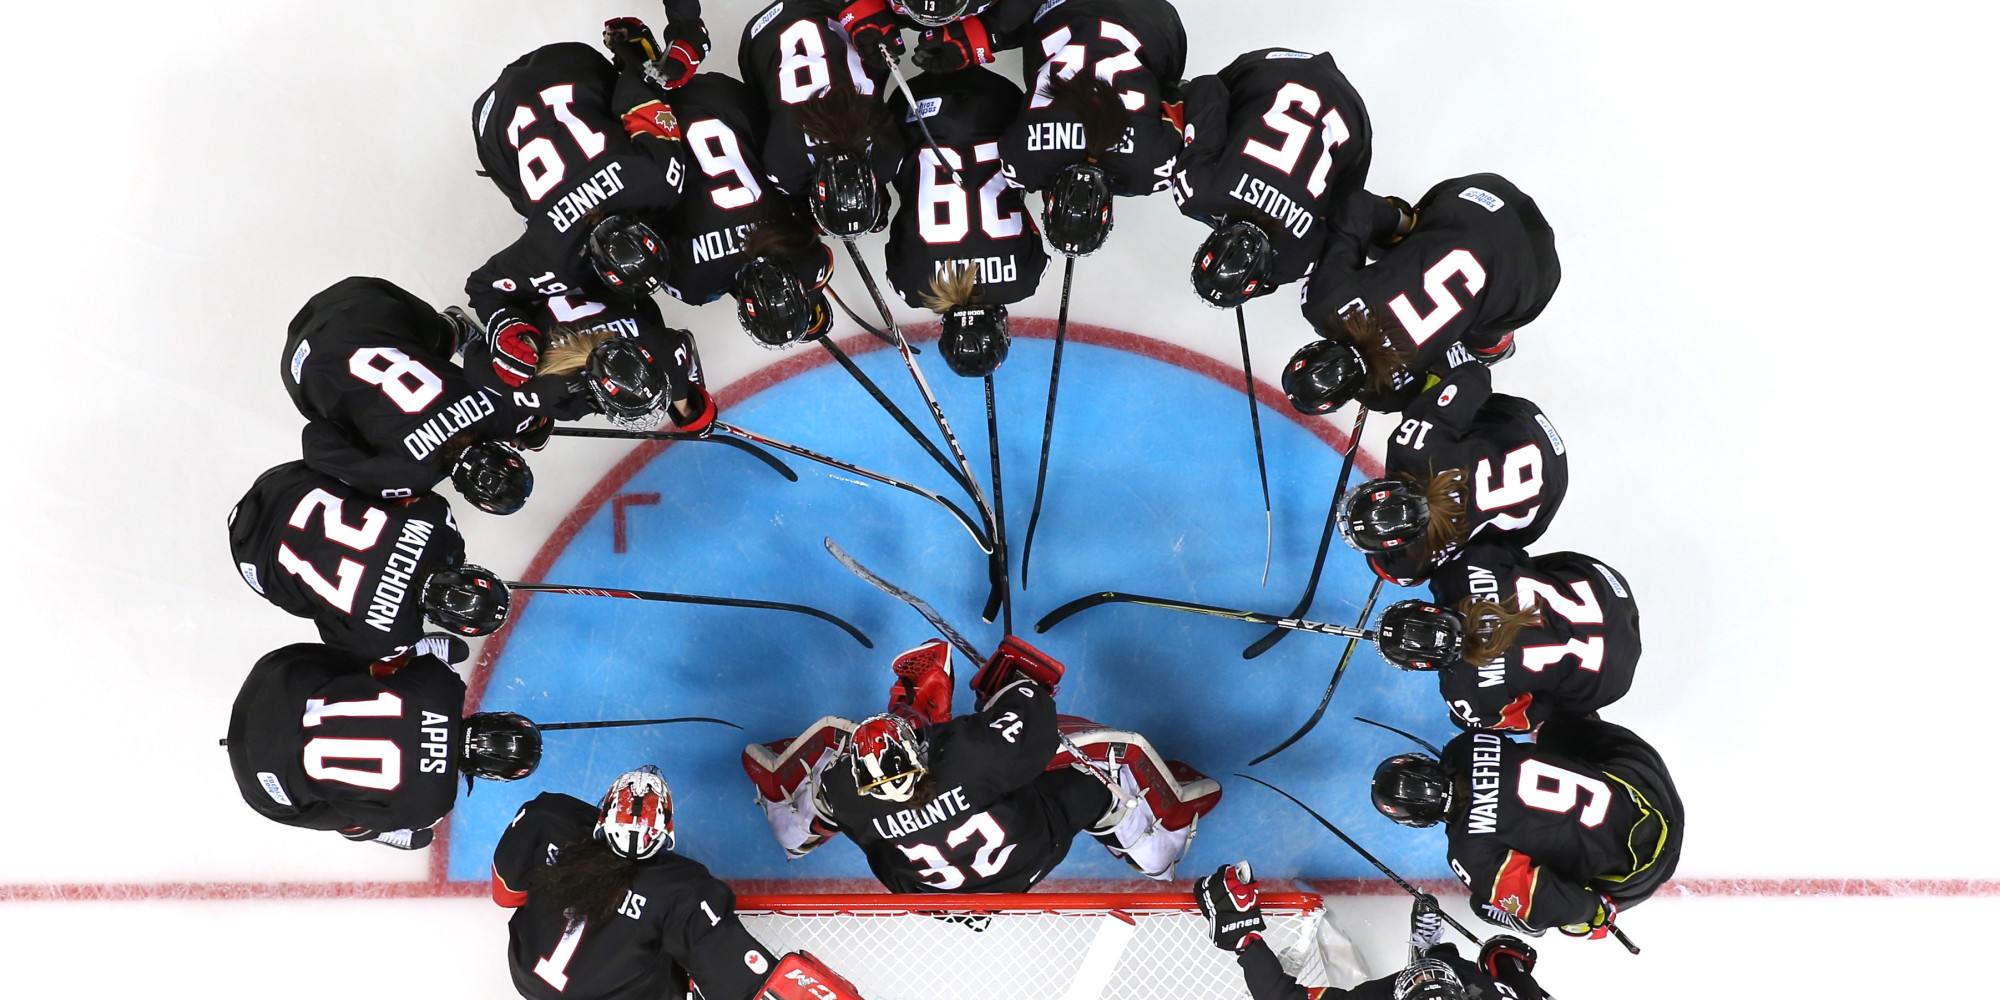 Canadian Women S Hockey Team At The Olympics In Sochi Wallpaper And